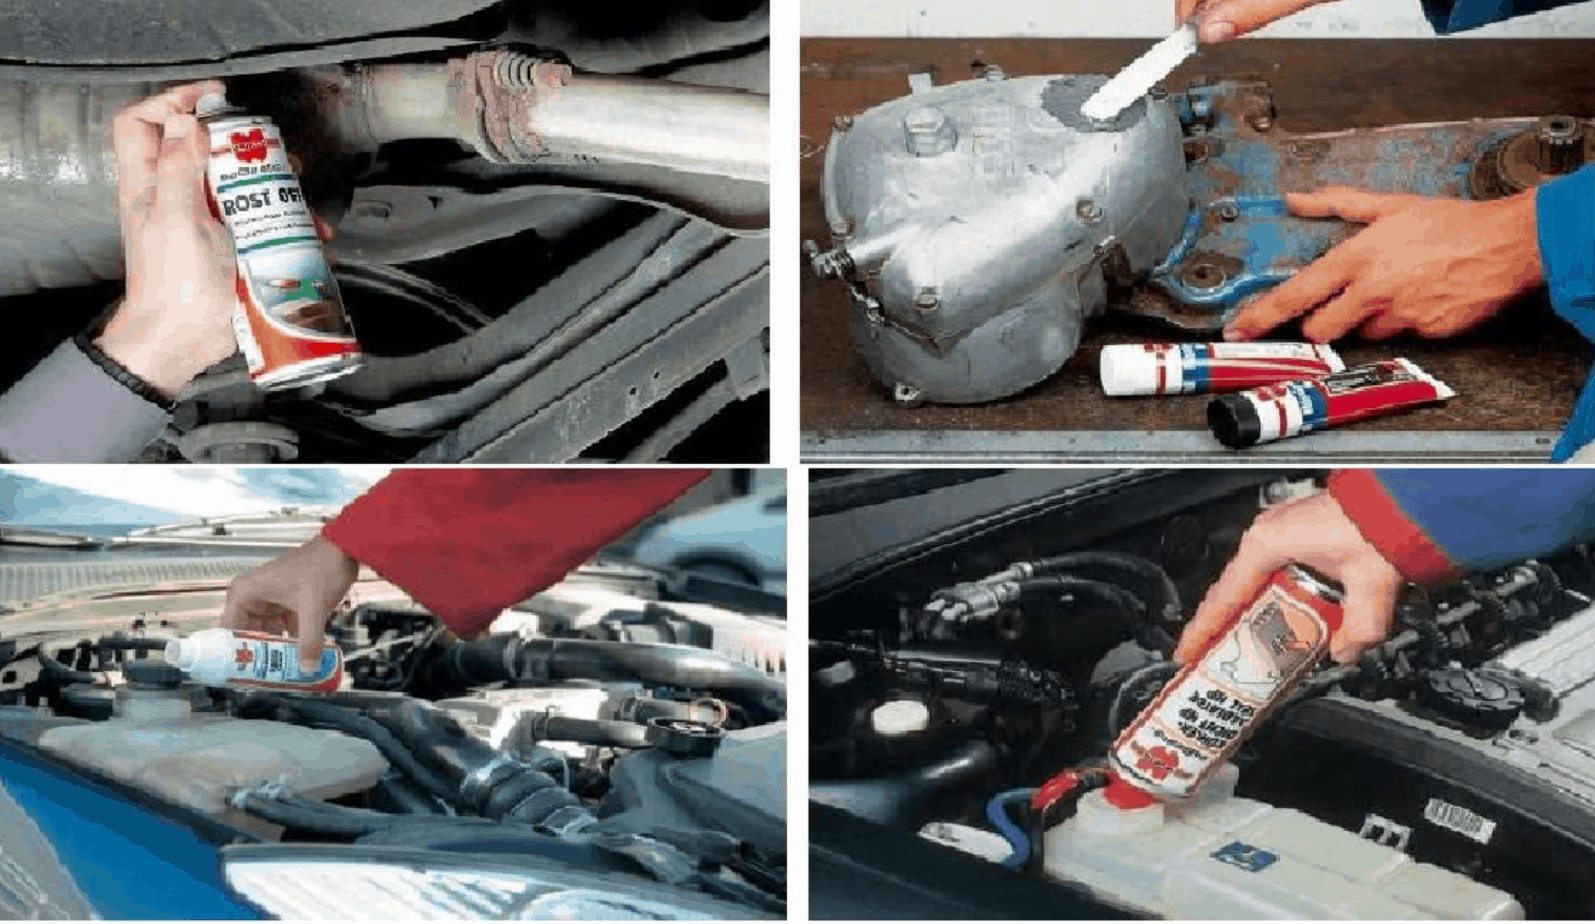 Clean the engine compartment by spraying clean water, spraying cleaning solution